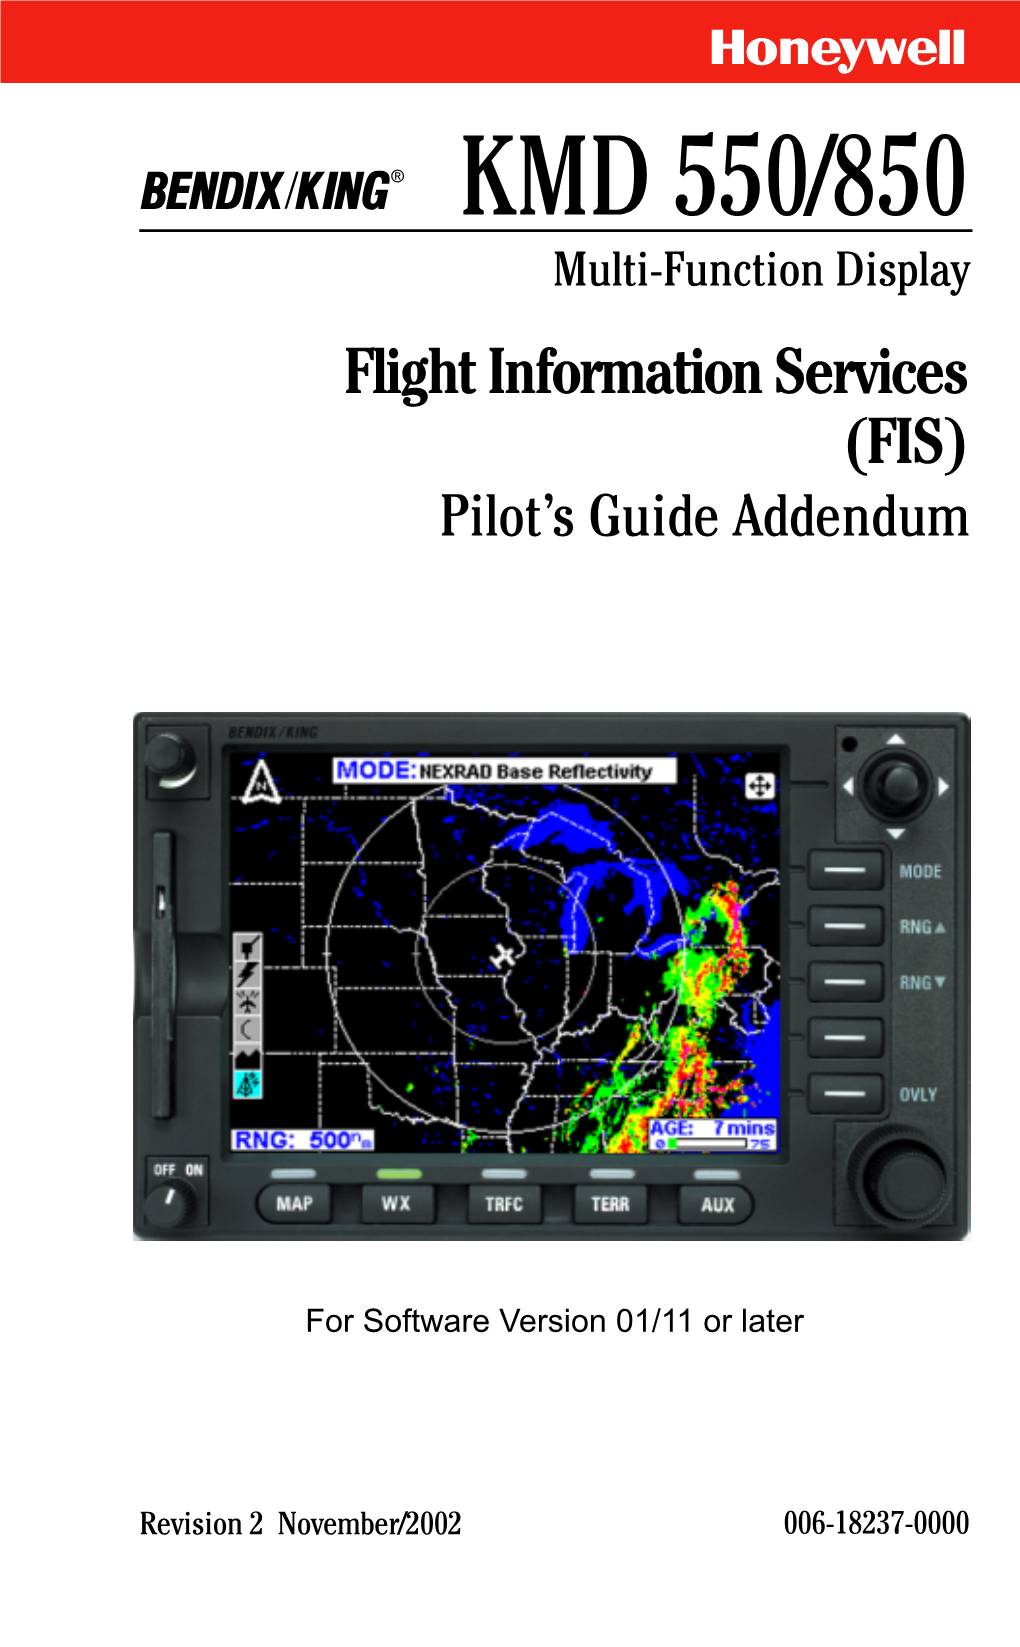 KMD 550/850 FIS Cover R2 11/21/02 5:33 PM Page 1 N B KMD 550/850 Multi-Function Display Flight Information Services (FIS) Pilot’S Guide Addendum